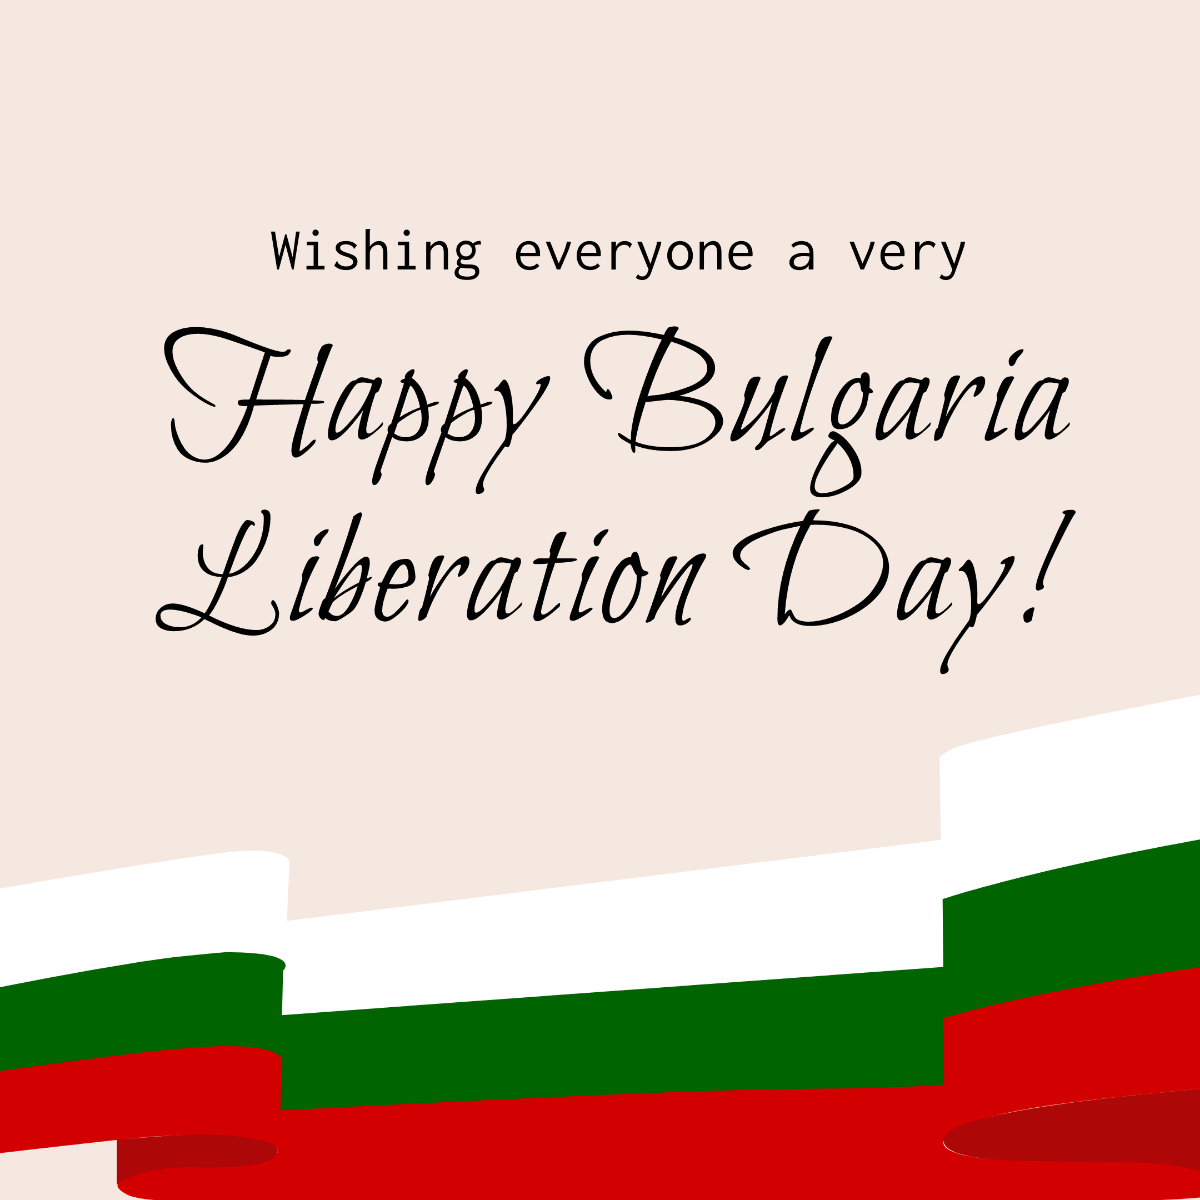 Bulgaria Liberation Day Wishes Vector